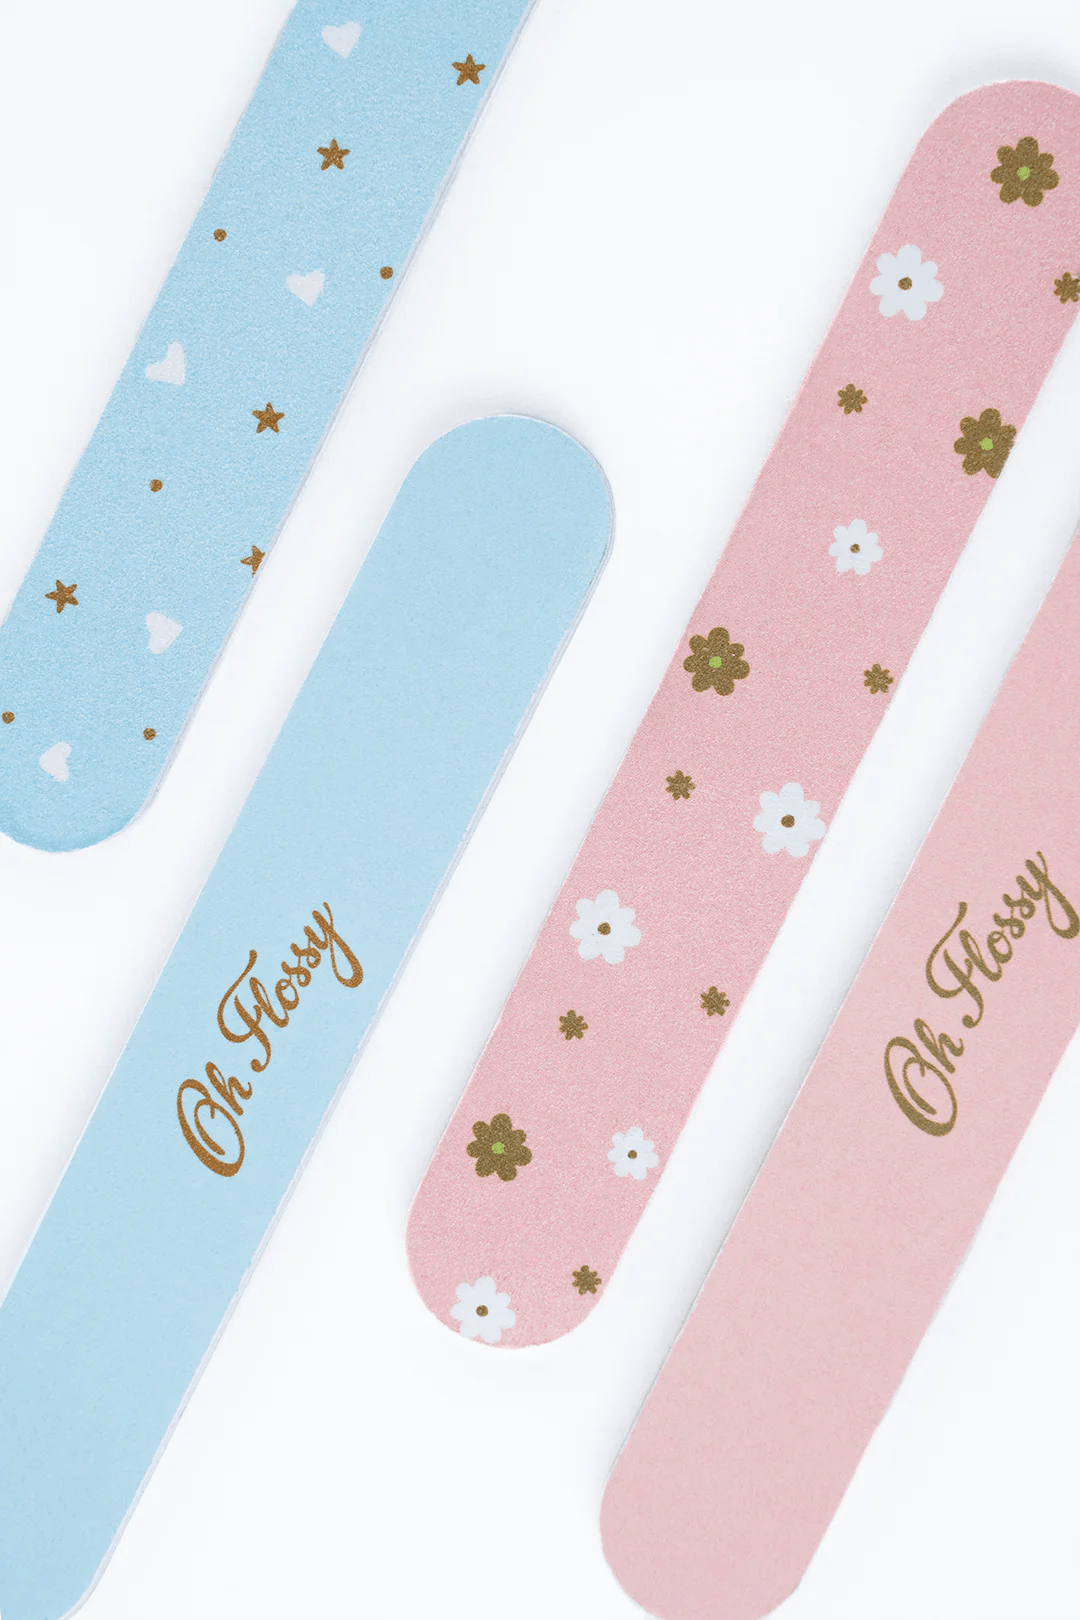 Oh Flossy Girls Accessory Oh Flossy - Nail Files - 2 pack